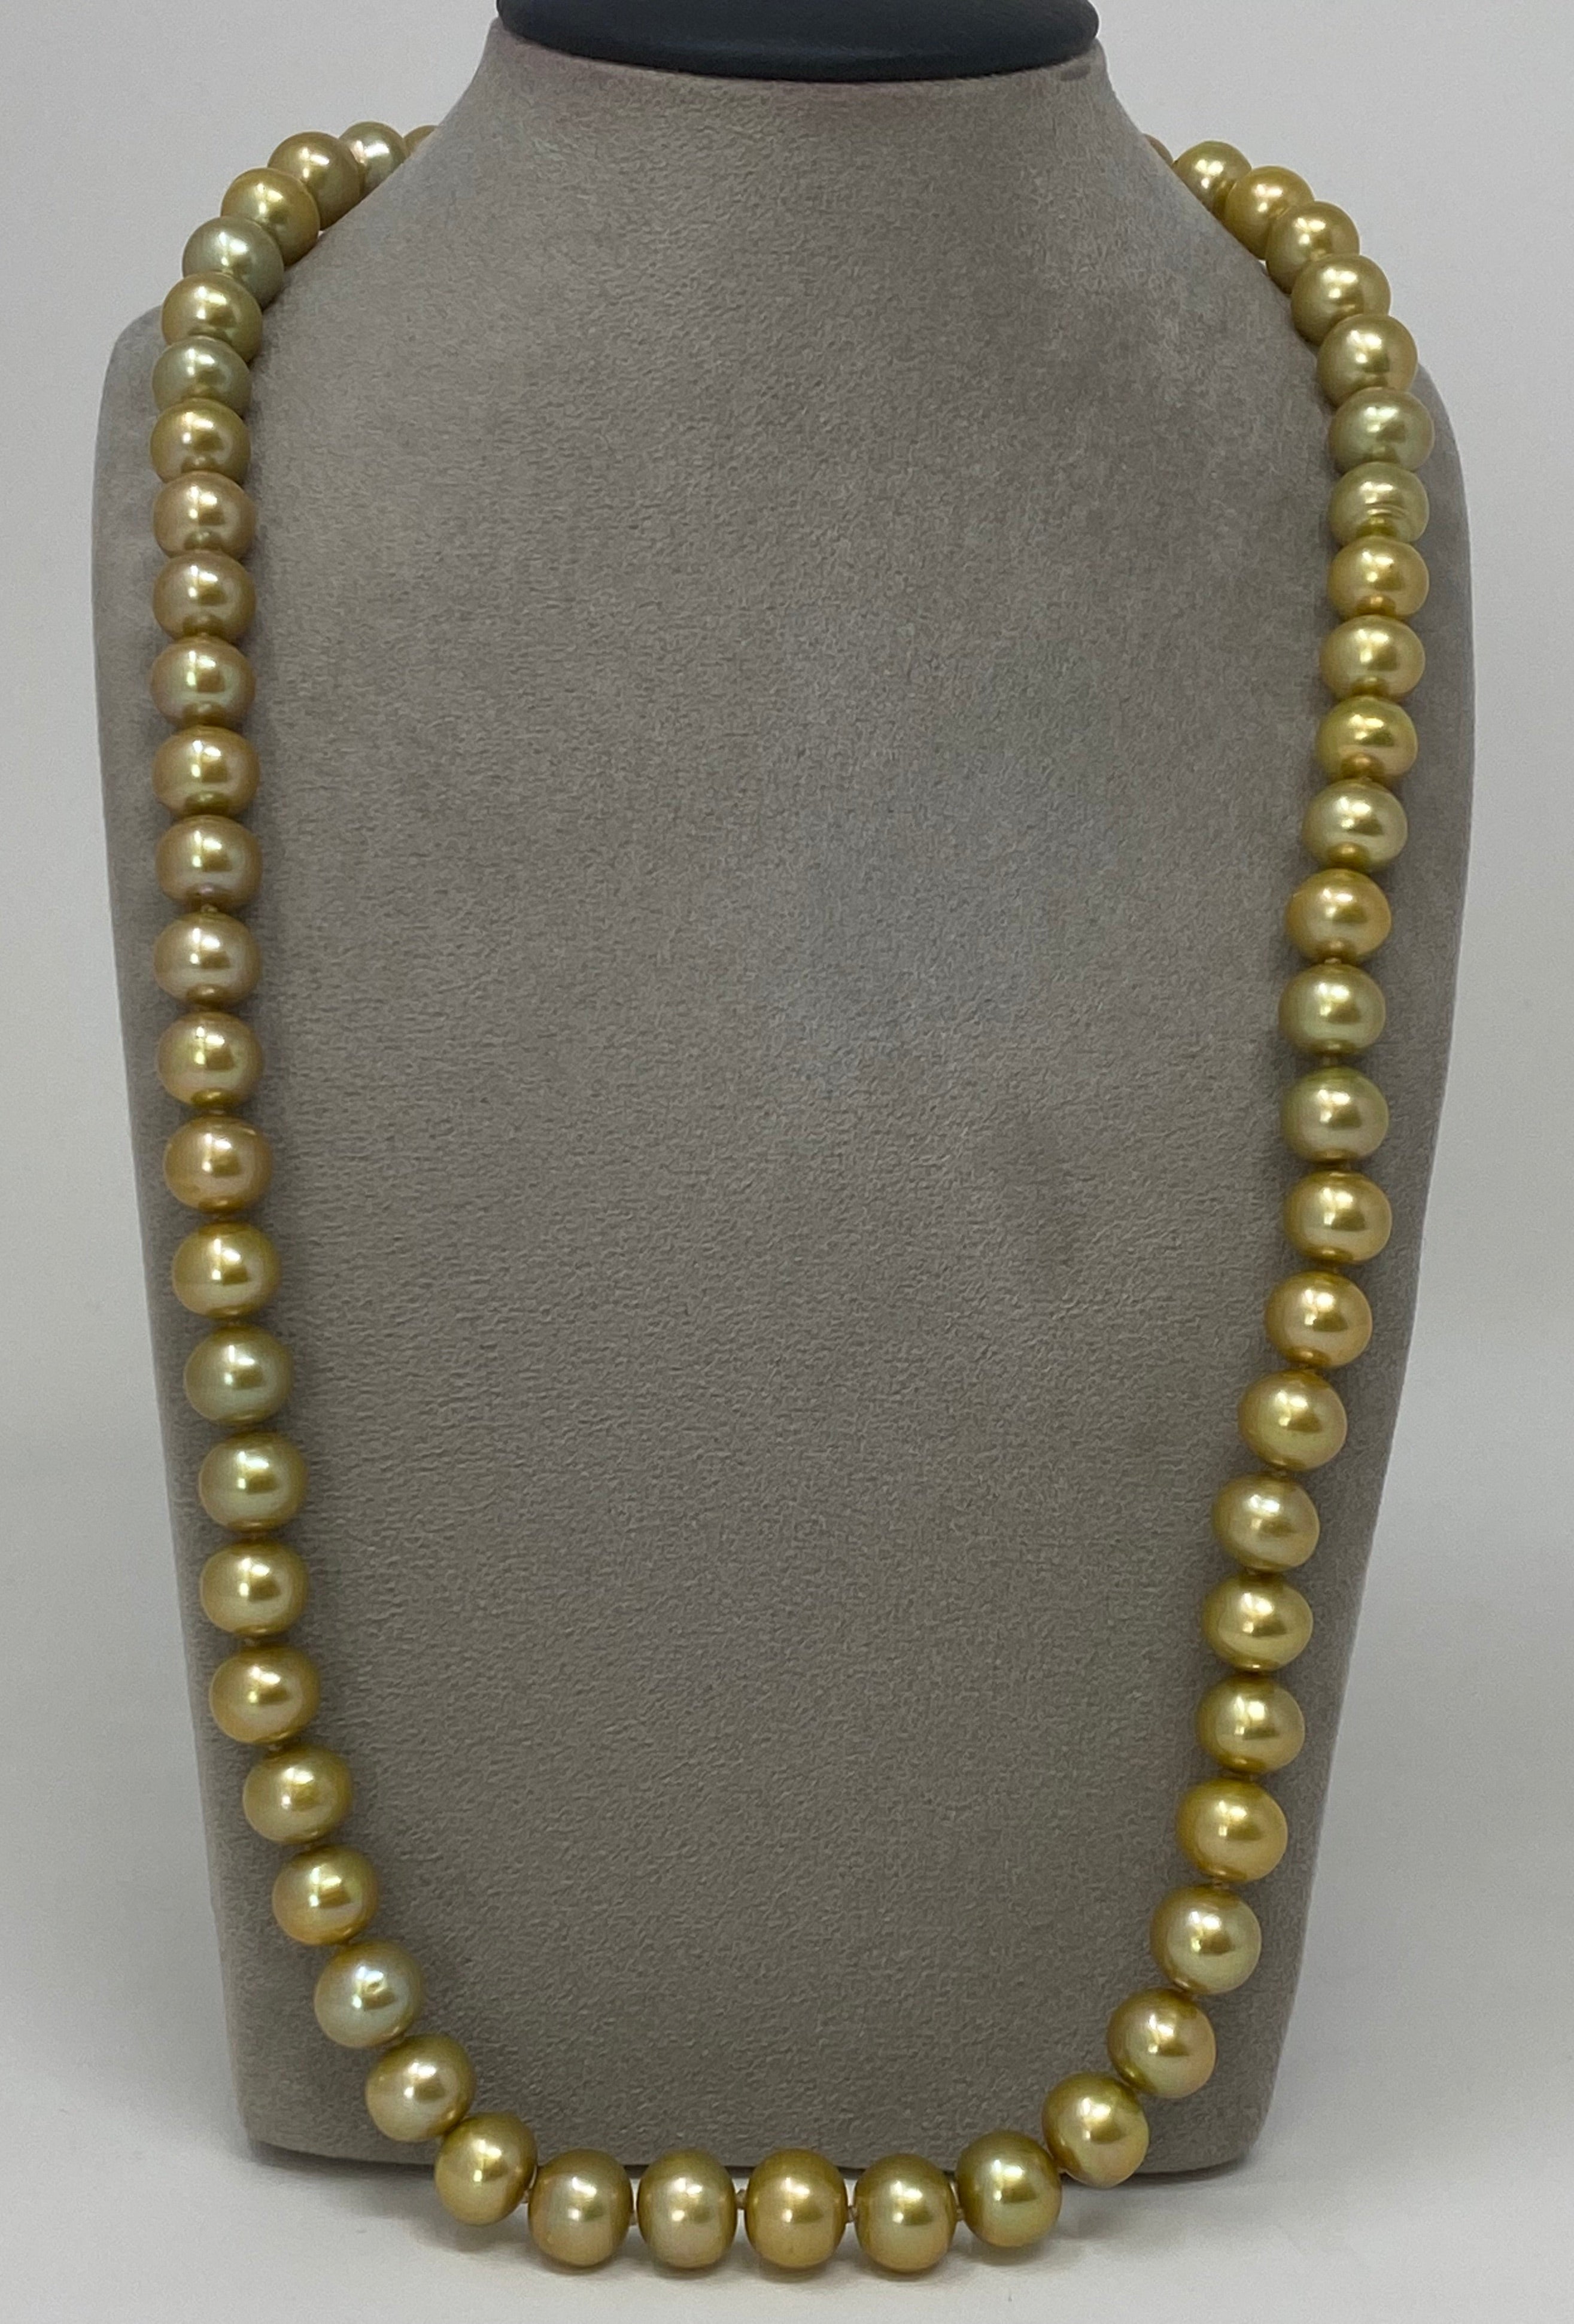 Gold Coloured Freshwater Pearls